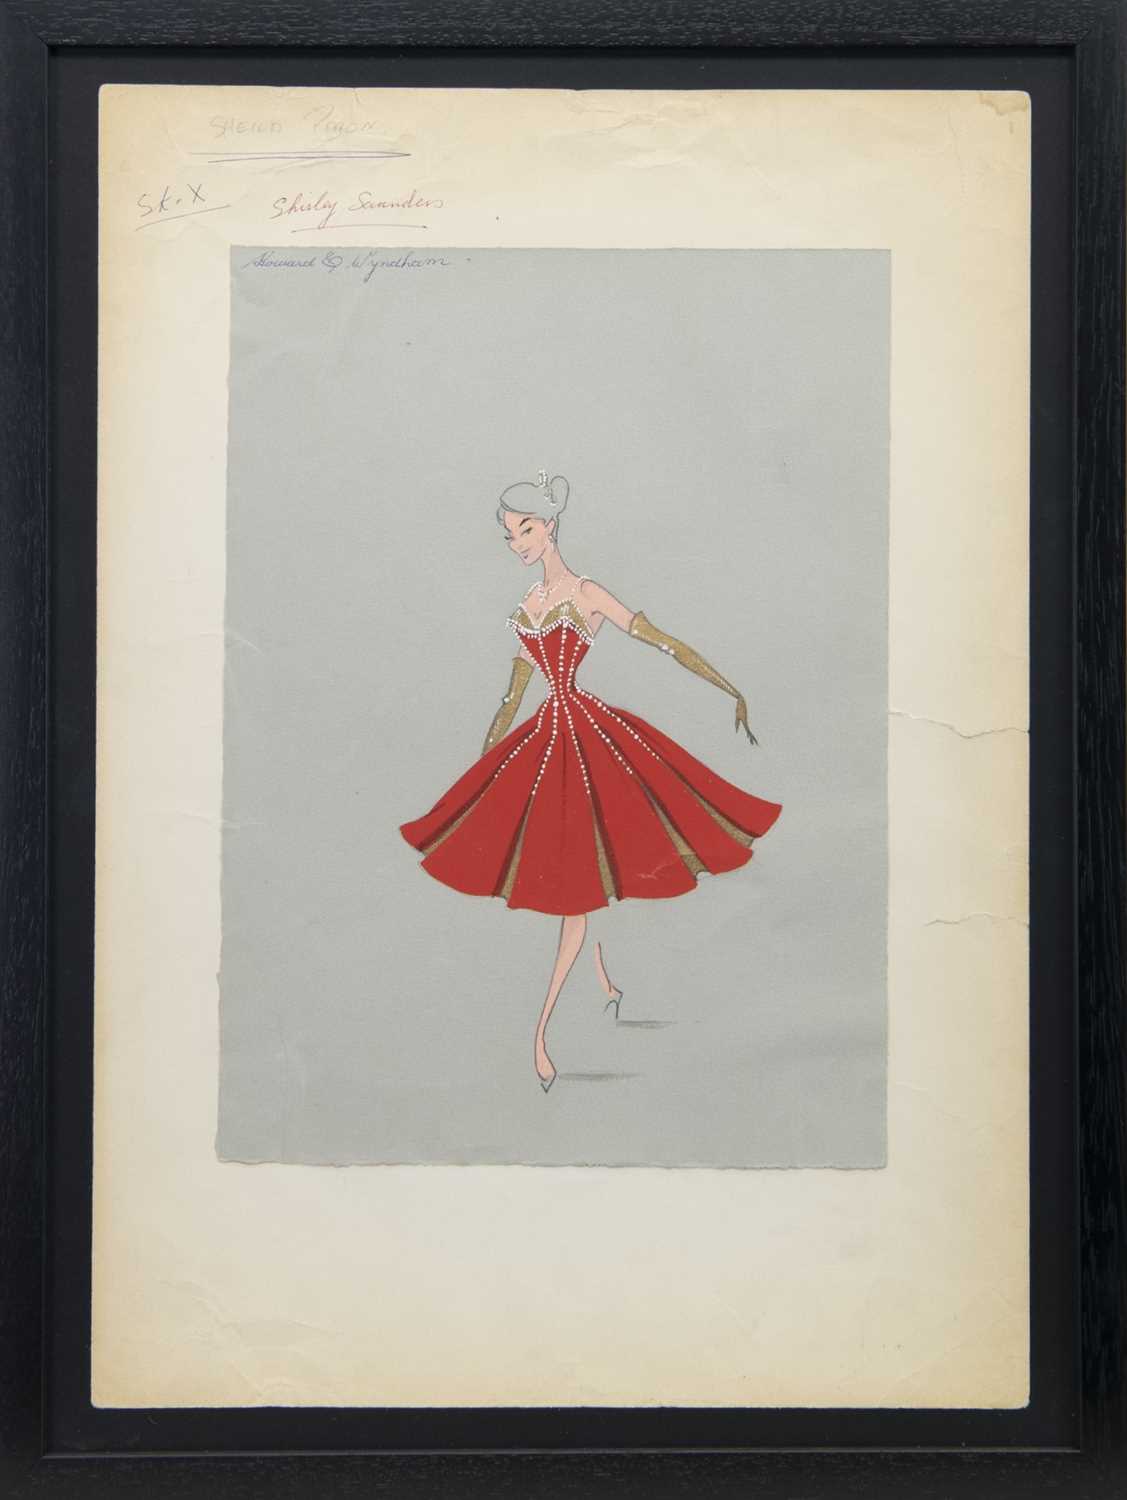 Lot 83 - COSTUME DESIGNS FOR THEATRE, A MIXED MEDIA BY RICHARD BERKELY SUTCLIFFE